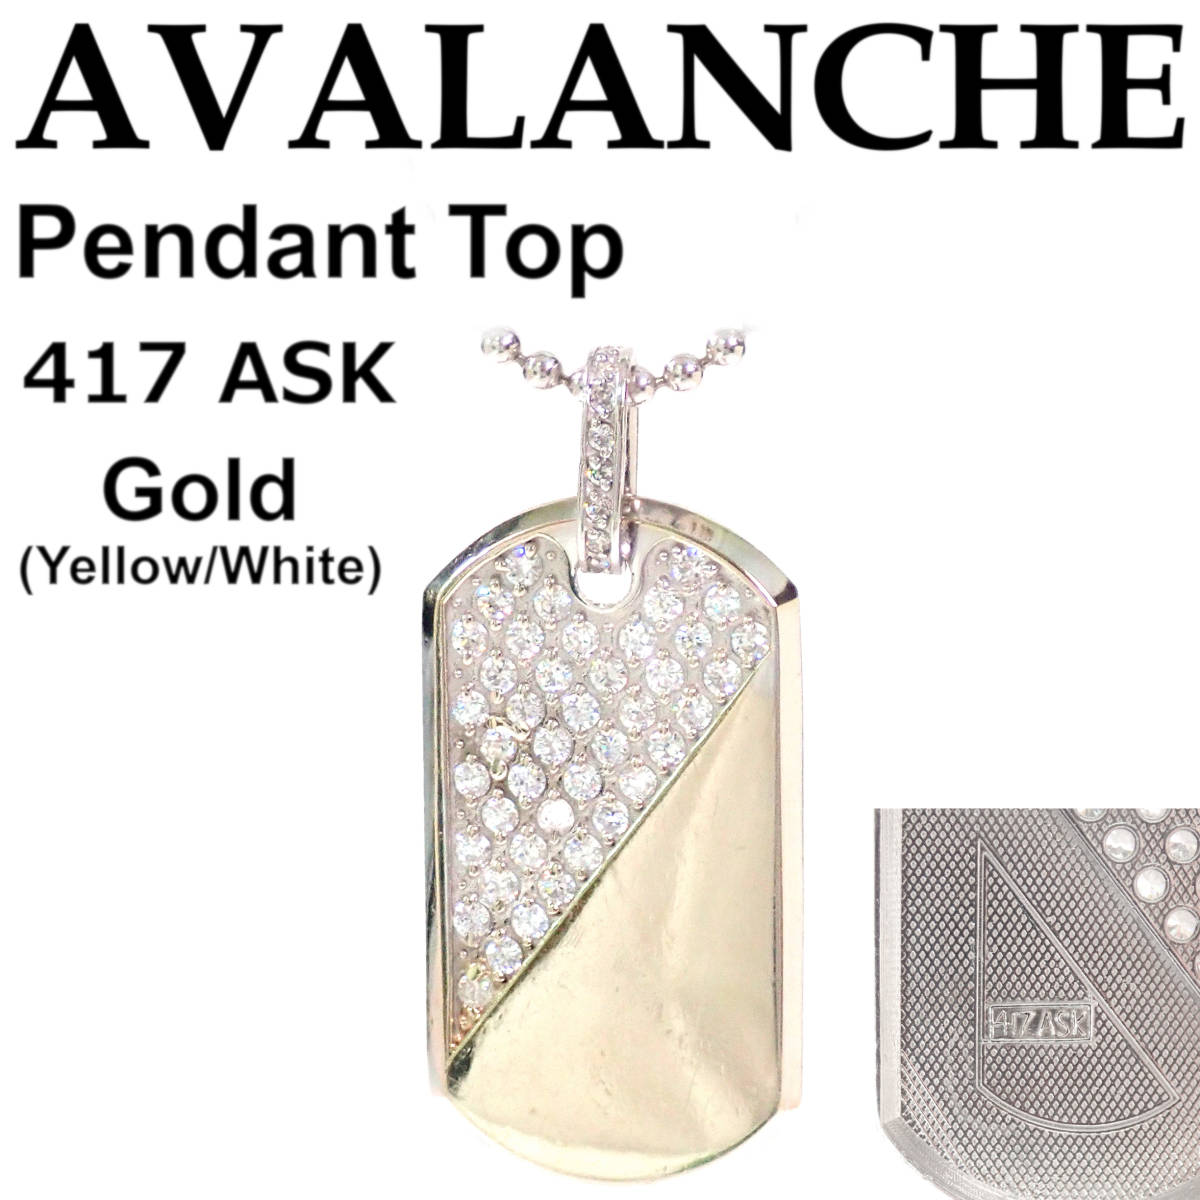 AVALANCHE Dog tag Pendant Top Gold(Yellow/White) 417(10K) ASK 52mm×28mm×2.5mm アヴァランチ ペンダントトップ